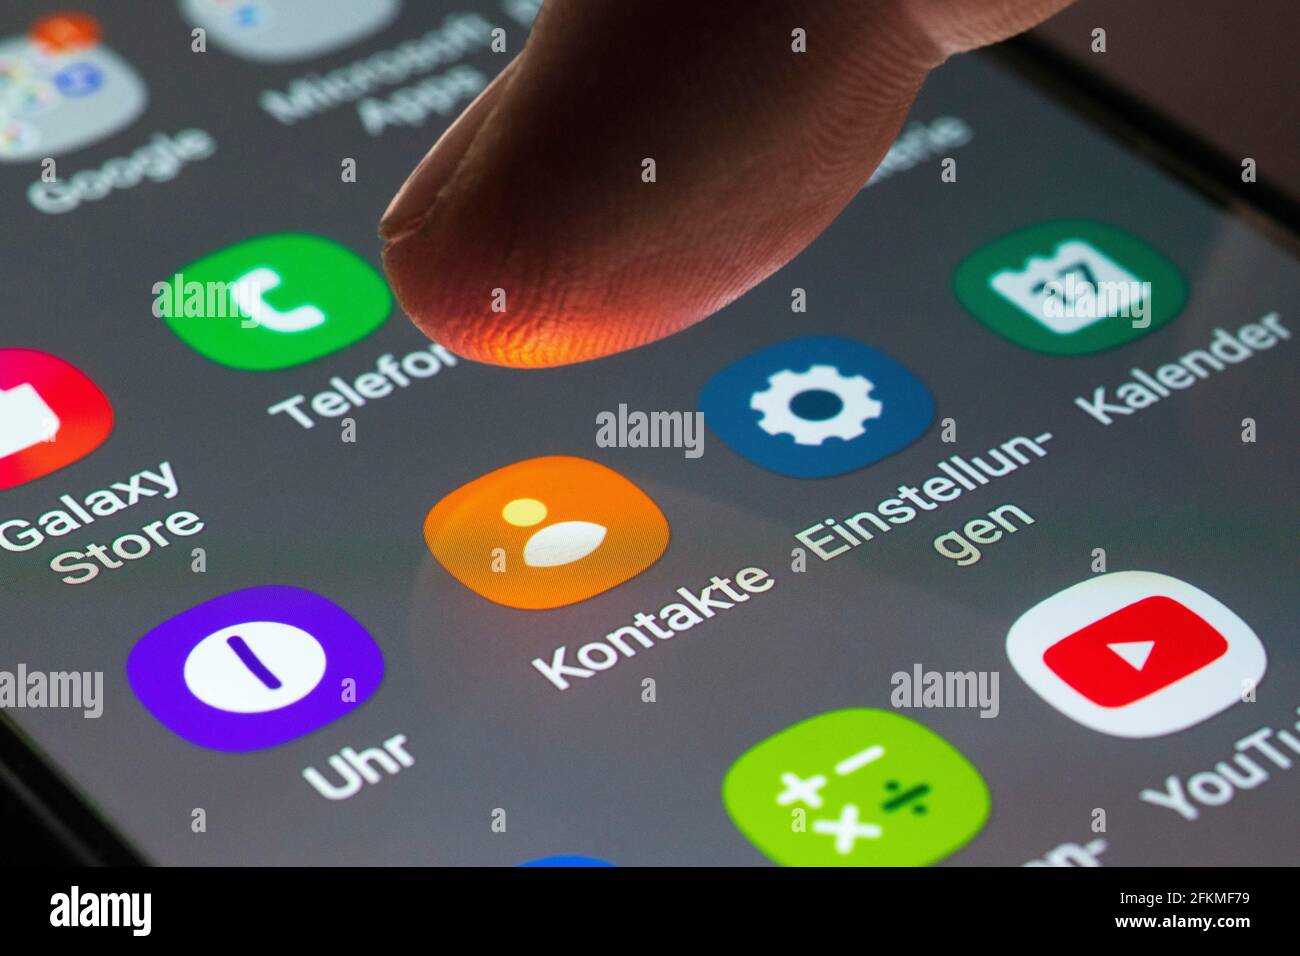 Contacts, settings, clock, calendar, logo, app icon, display on a mobile screen, smartphone Stock Photo